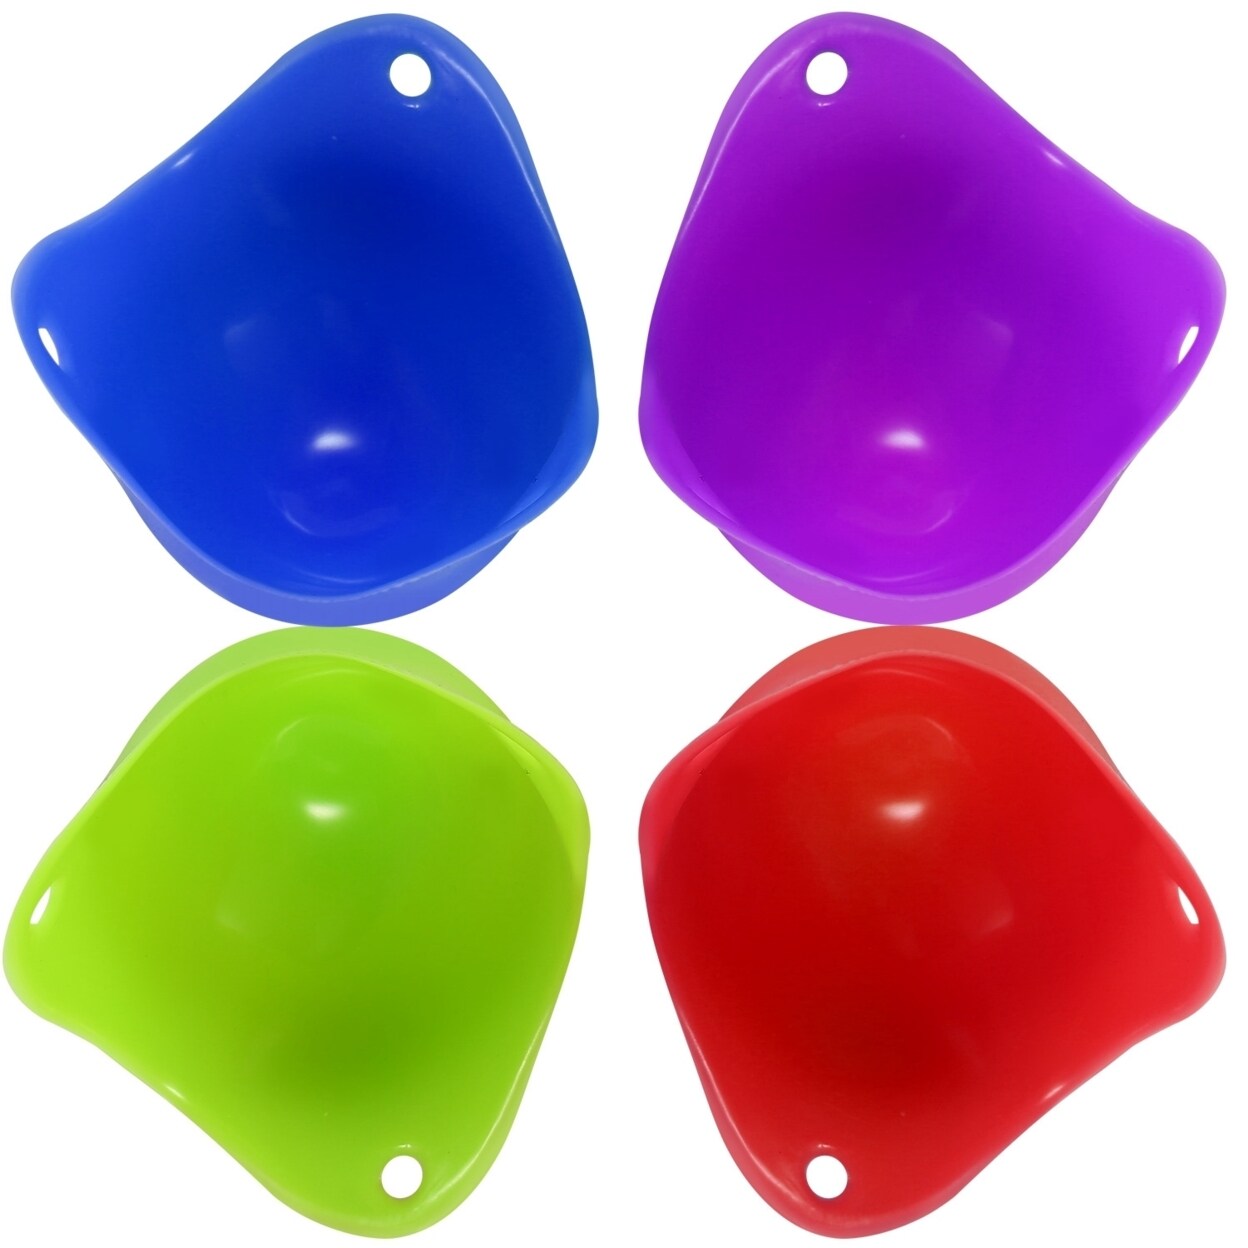 Global Phoenix 4 Pack Egg Poachers Silicone Egg Poaching Cups BPA Free Non-Stick Poached Egg Maker